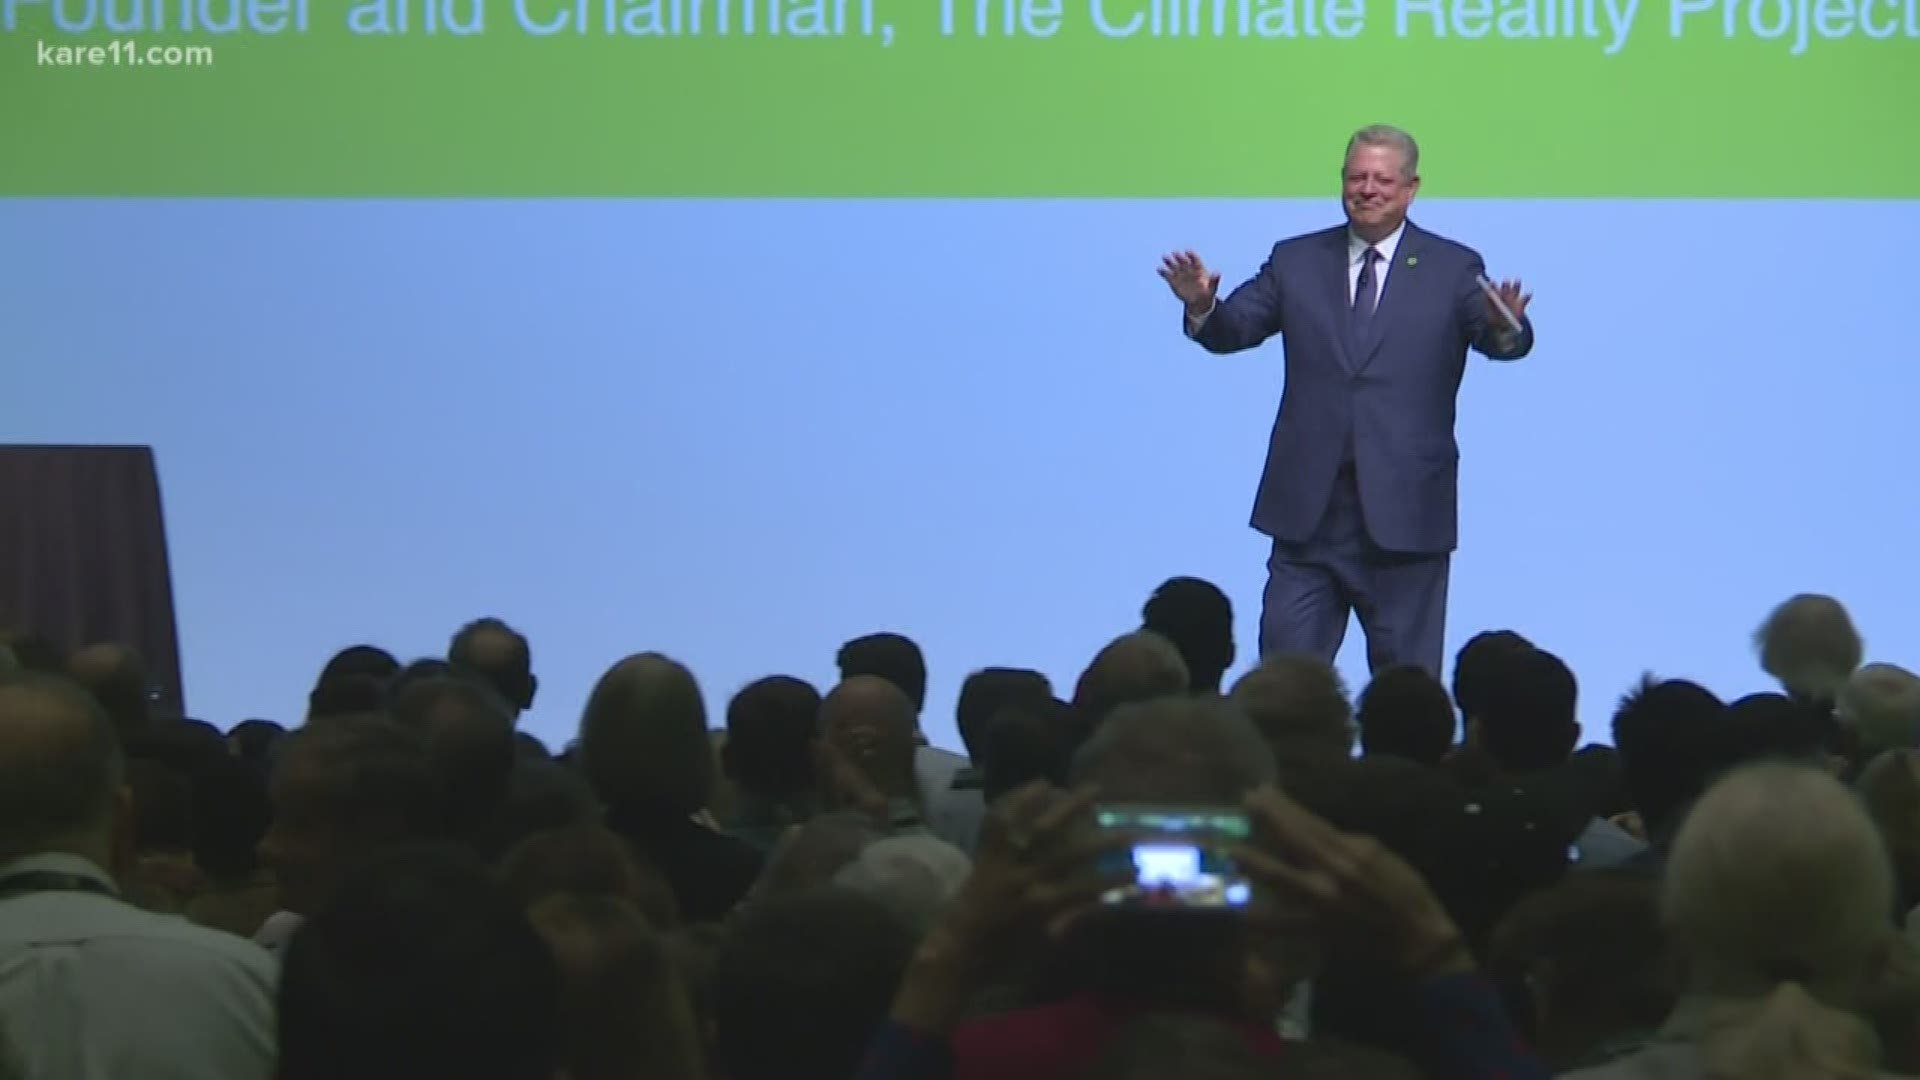 Former Vice President Al Gore caught up with KARE 11 while leading climate training in Minneapolis